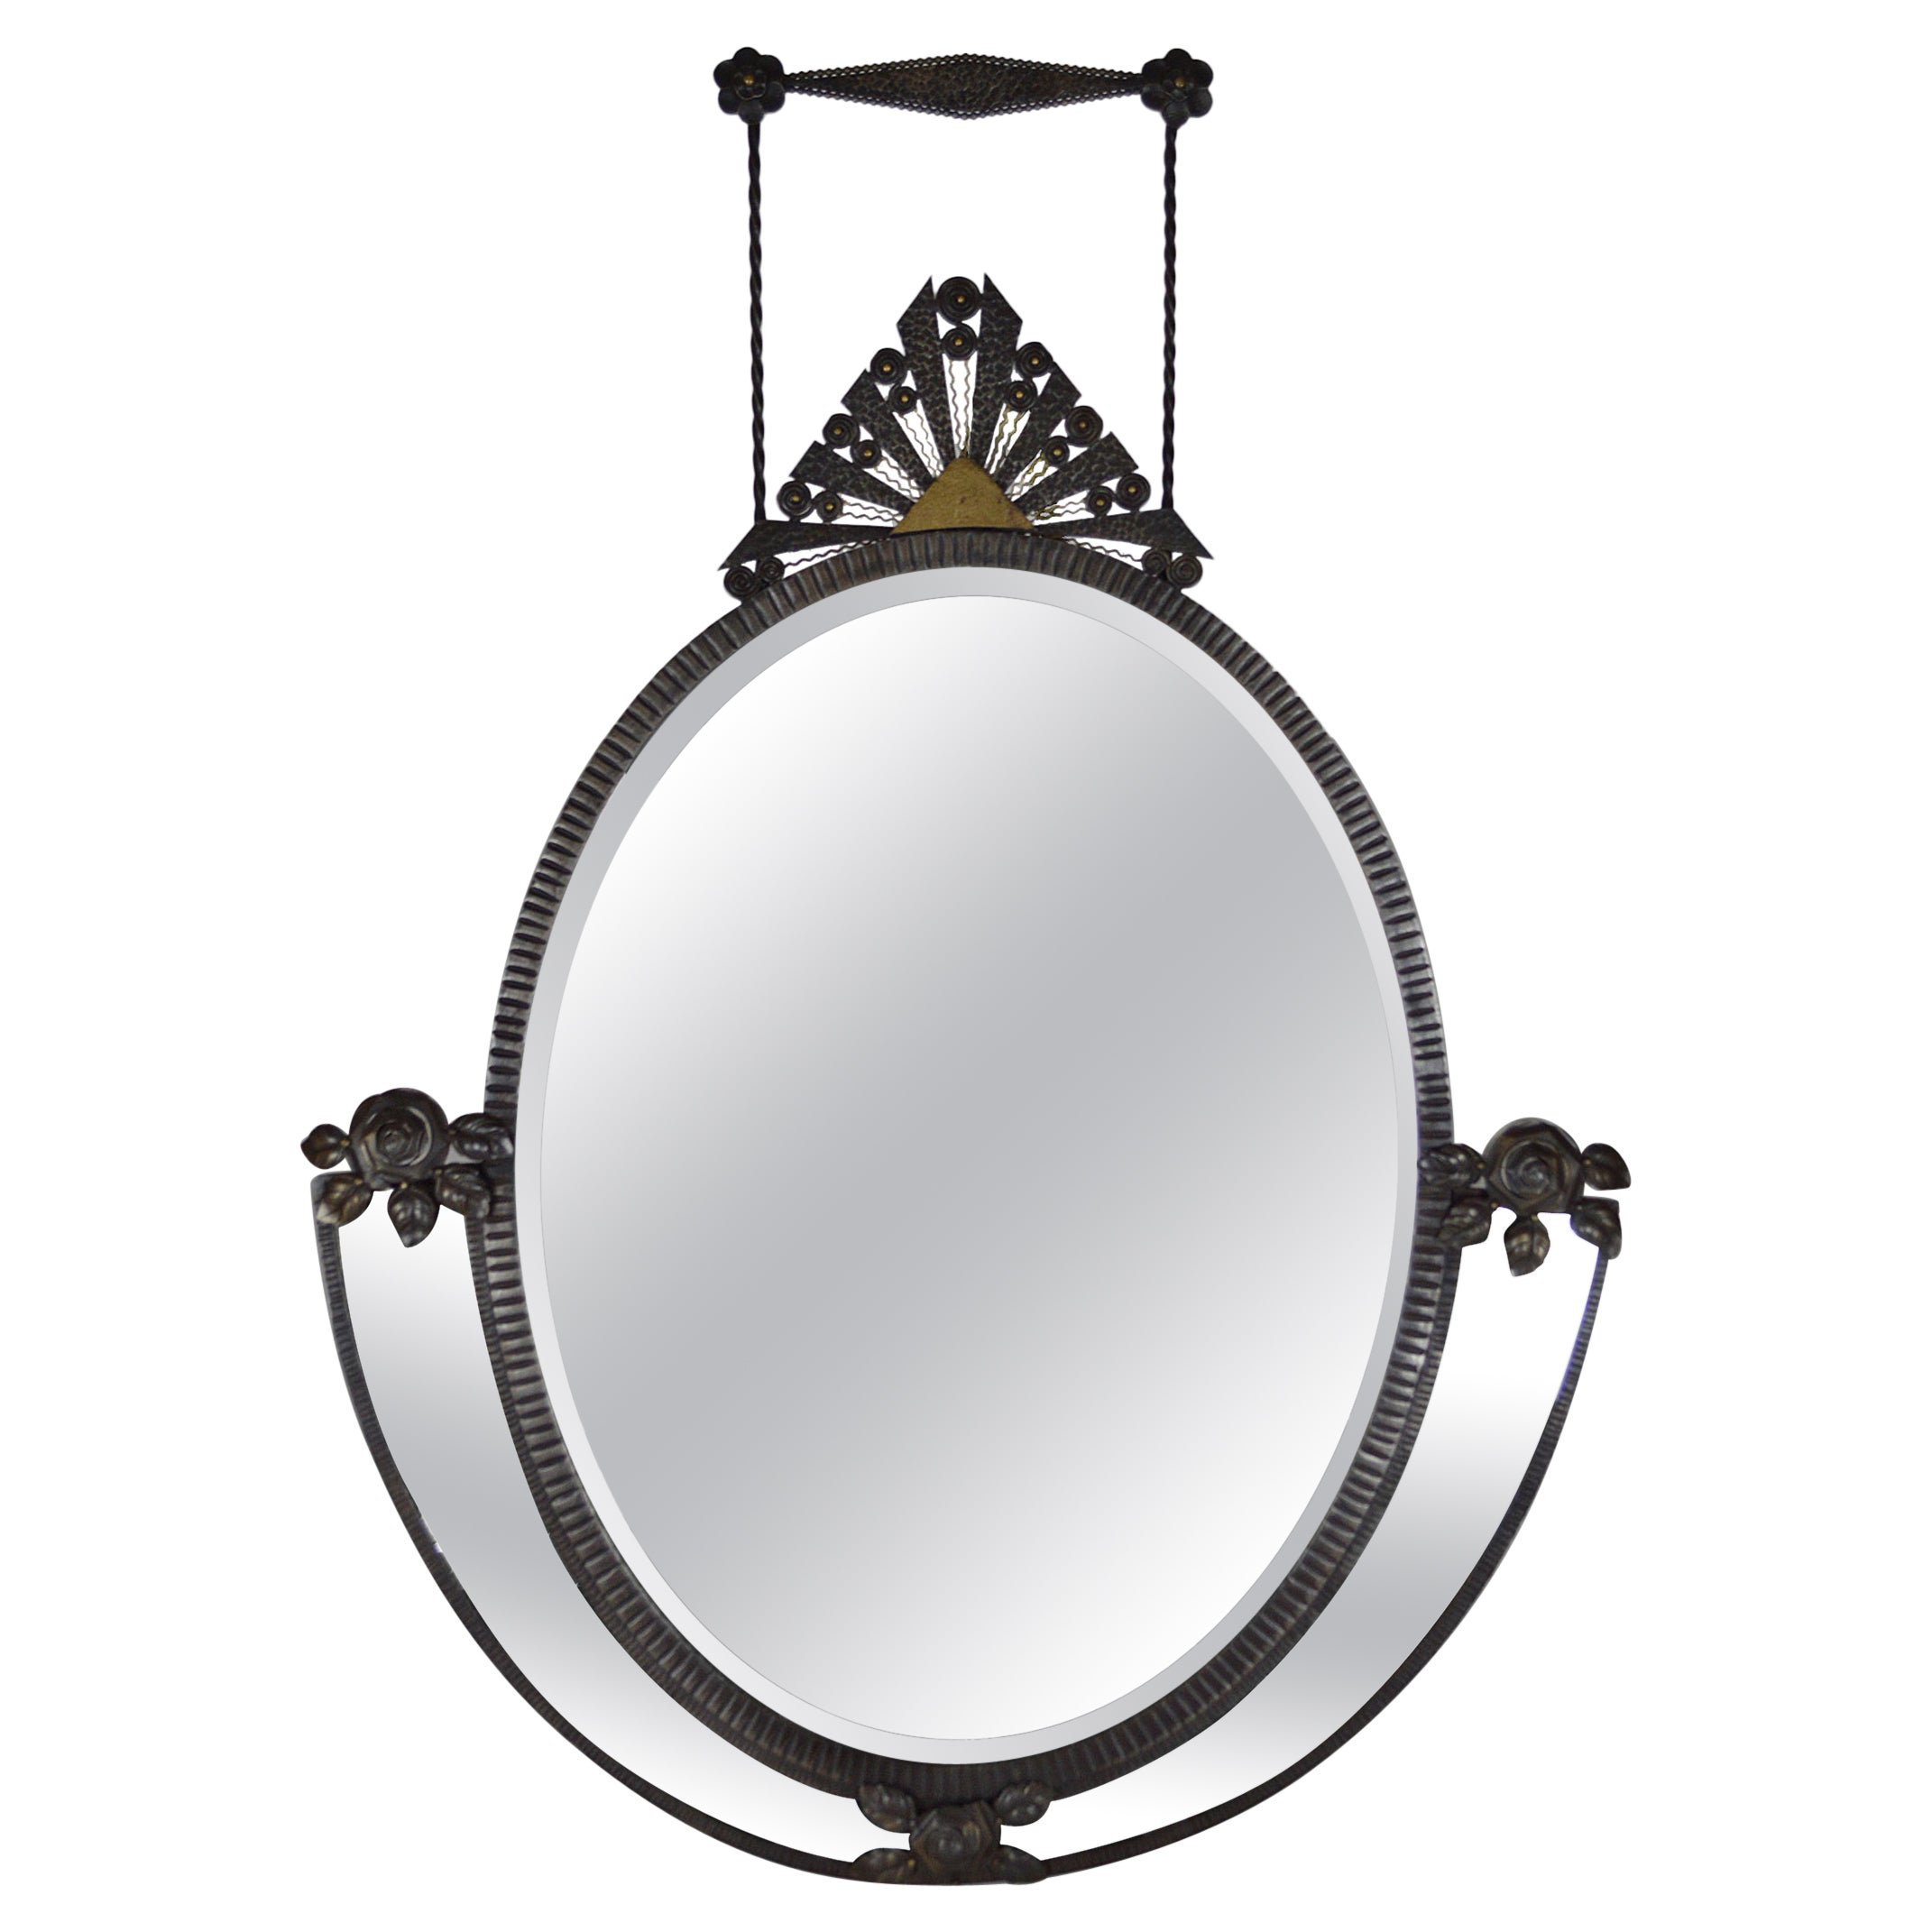 Large Oval Art Deco Wrought Iron Mirror, France, circa 1925 For Sale